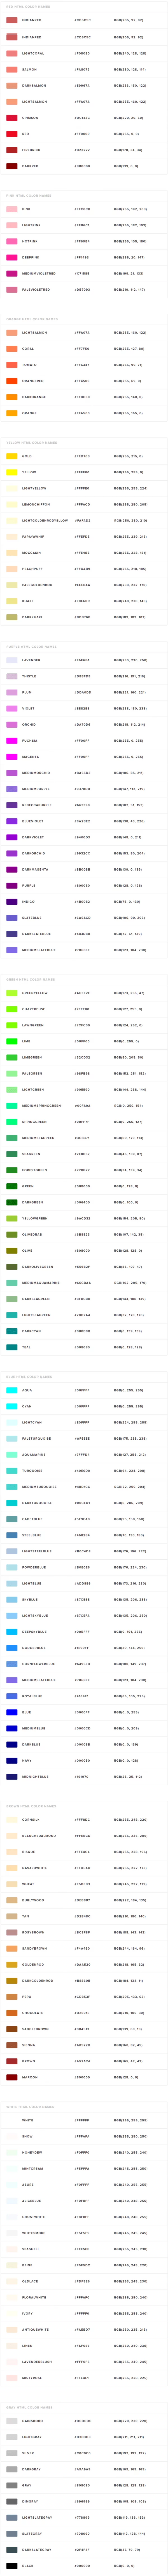 HTML Color Codes and Names